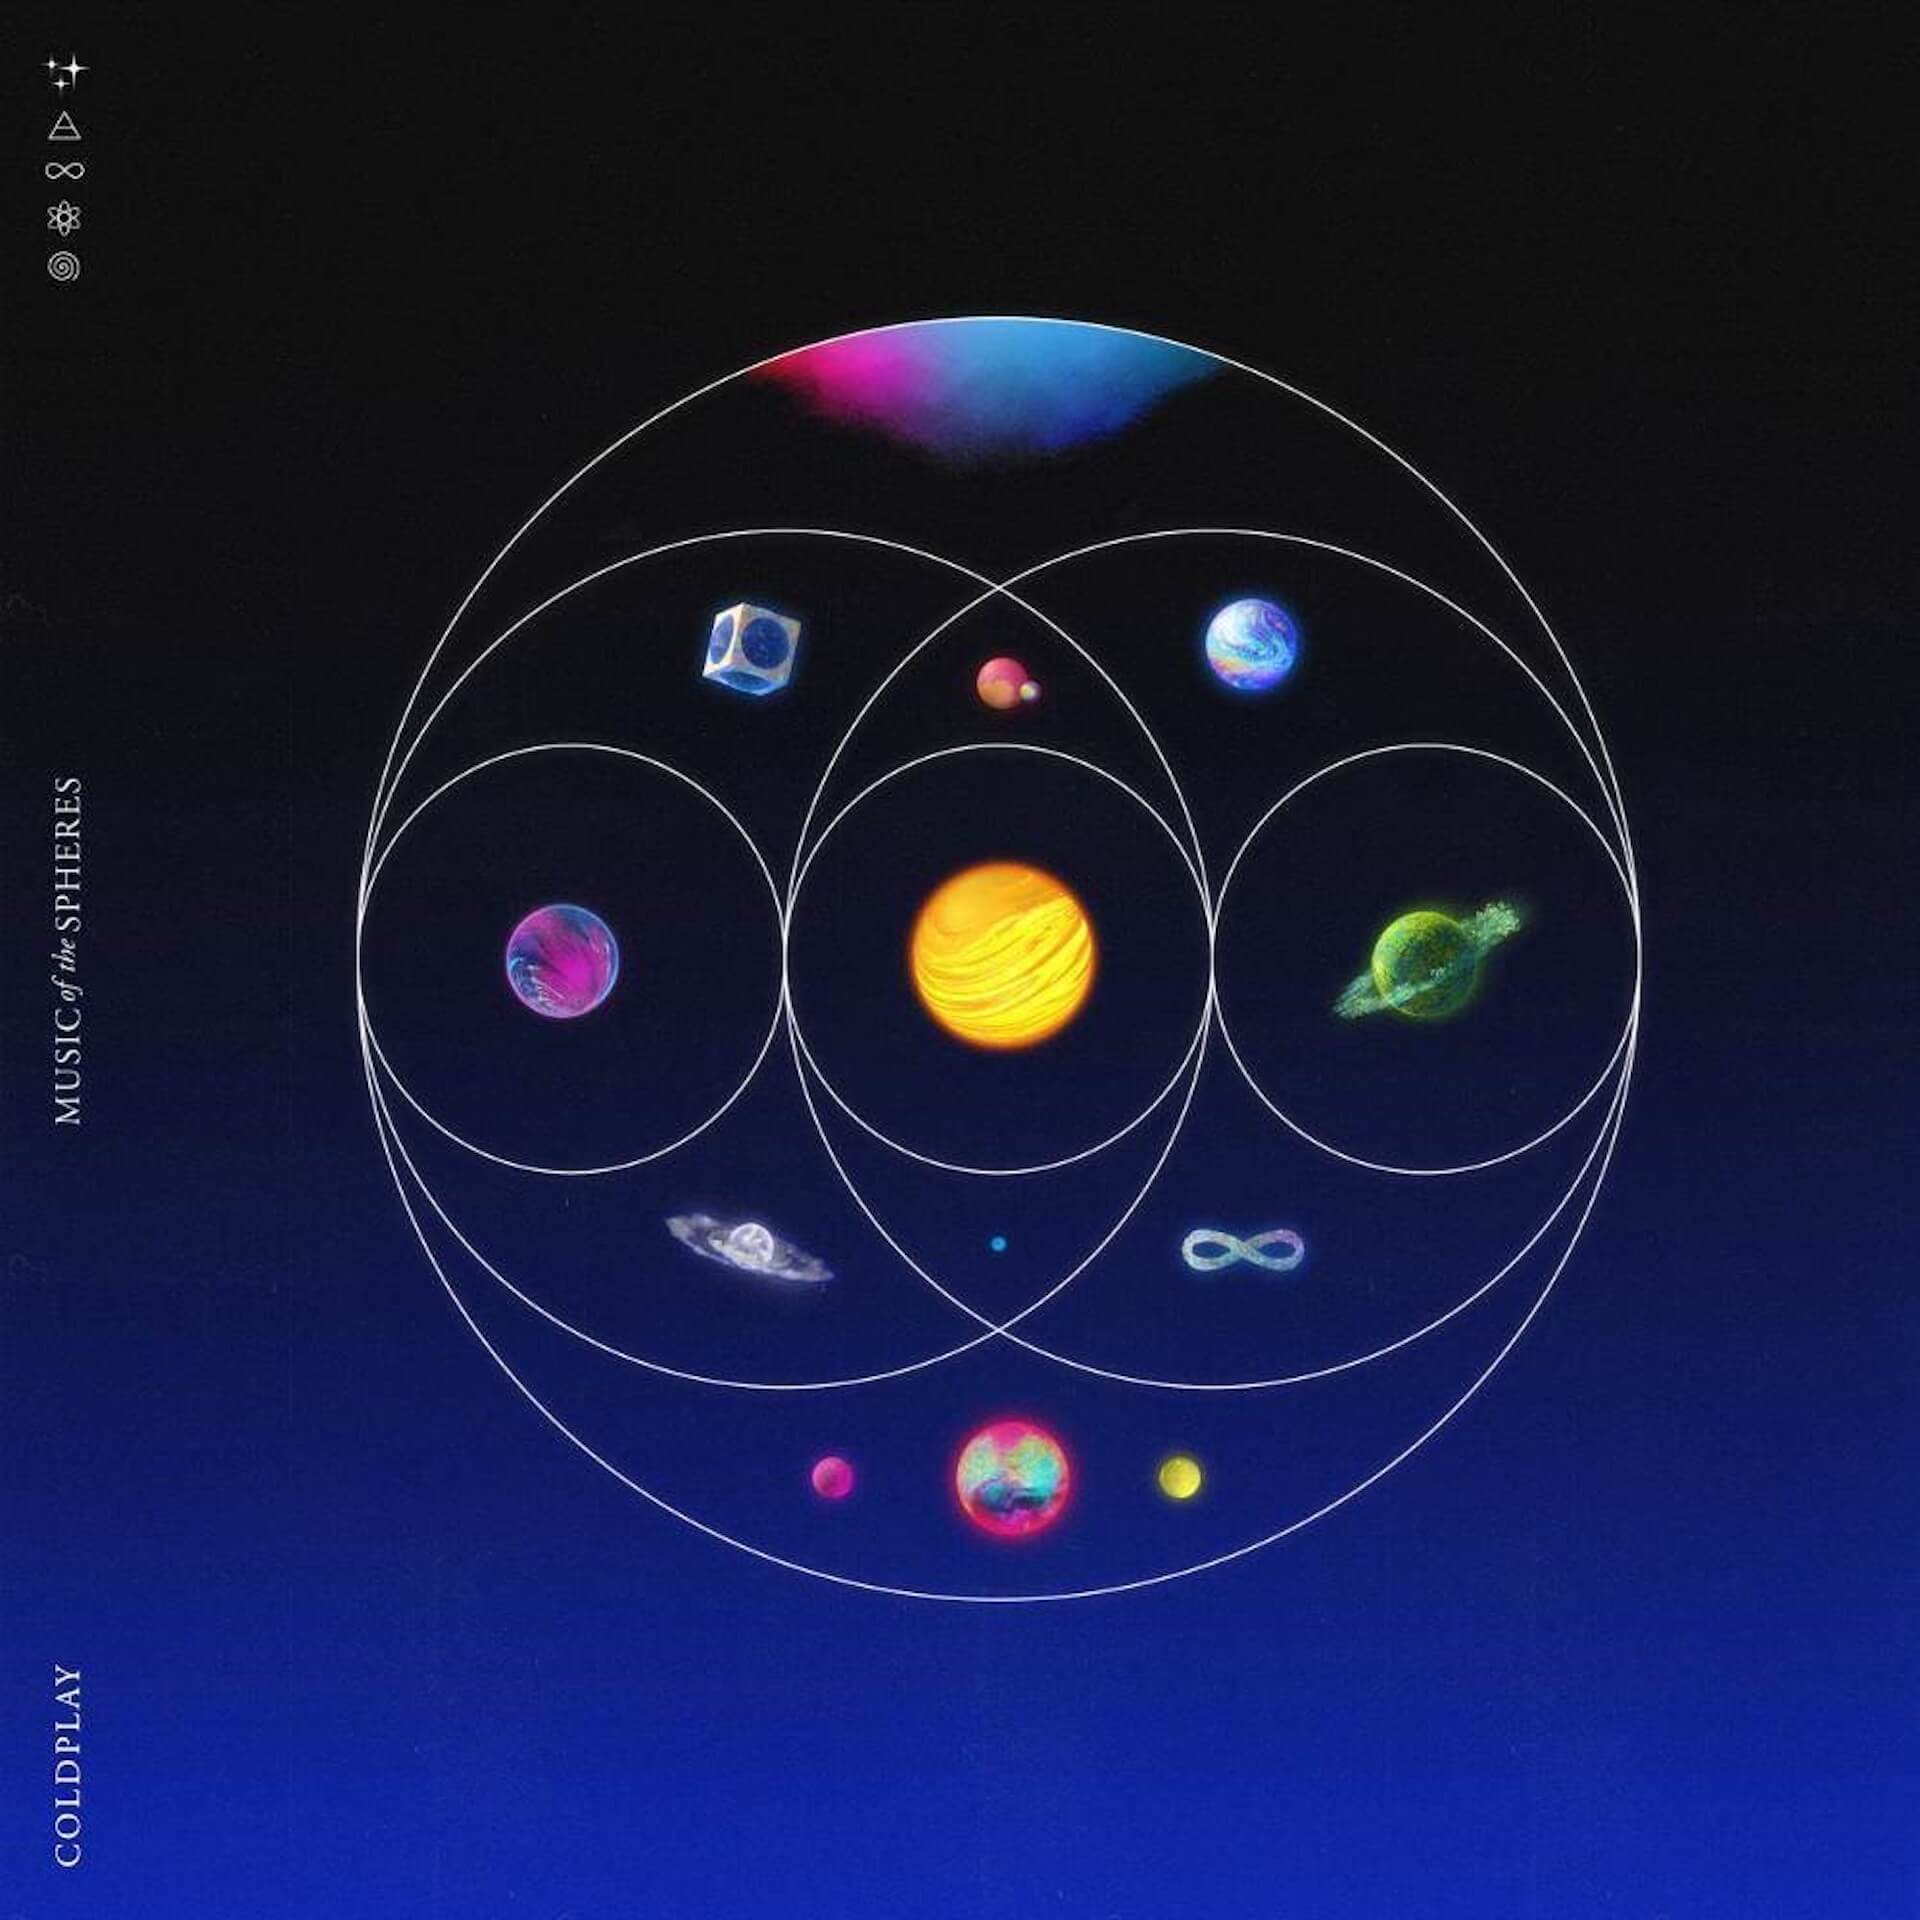 Coldplayのニューアルバム『Music Of The Spheres』発売記念コンサートがAmazon Musicにて独占配信決定！ music211014-coldplay-02